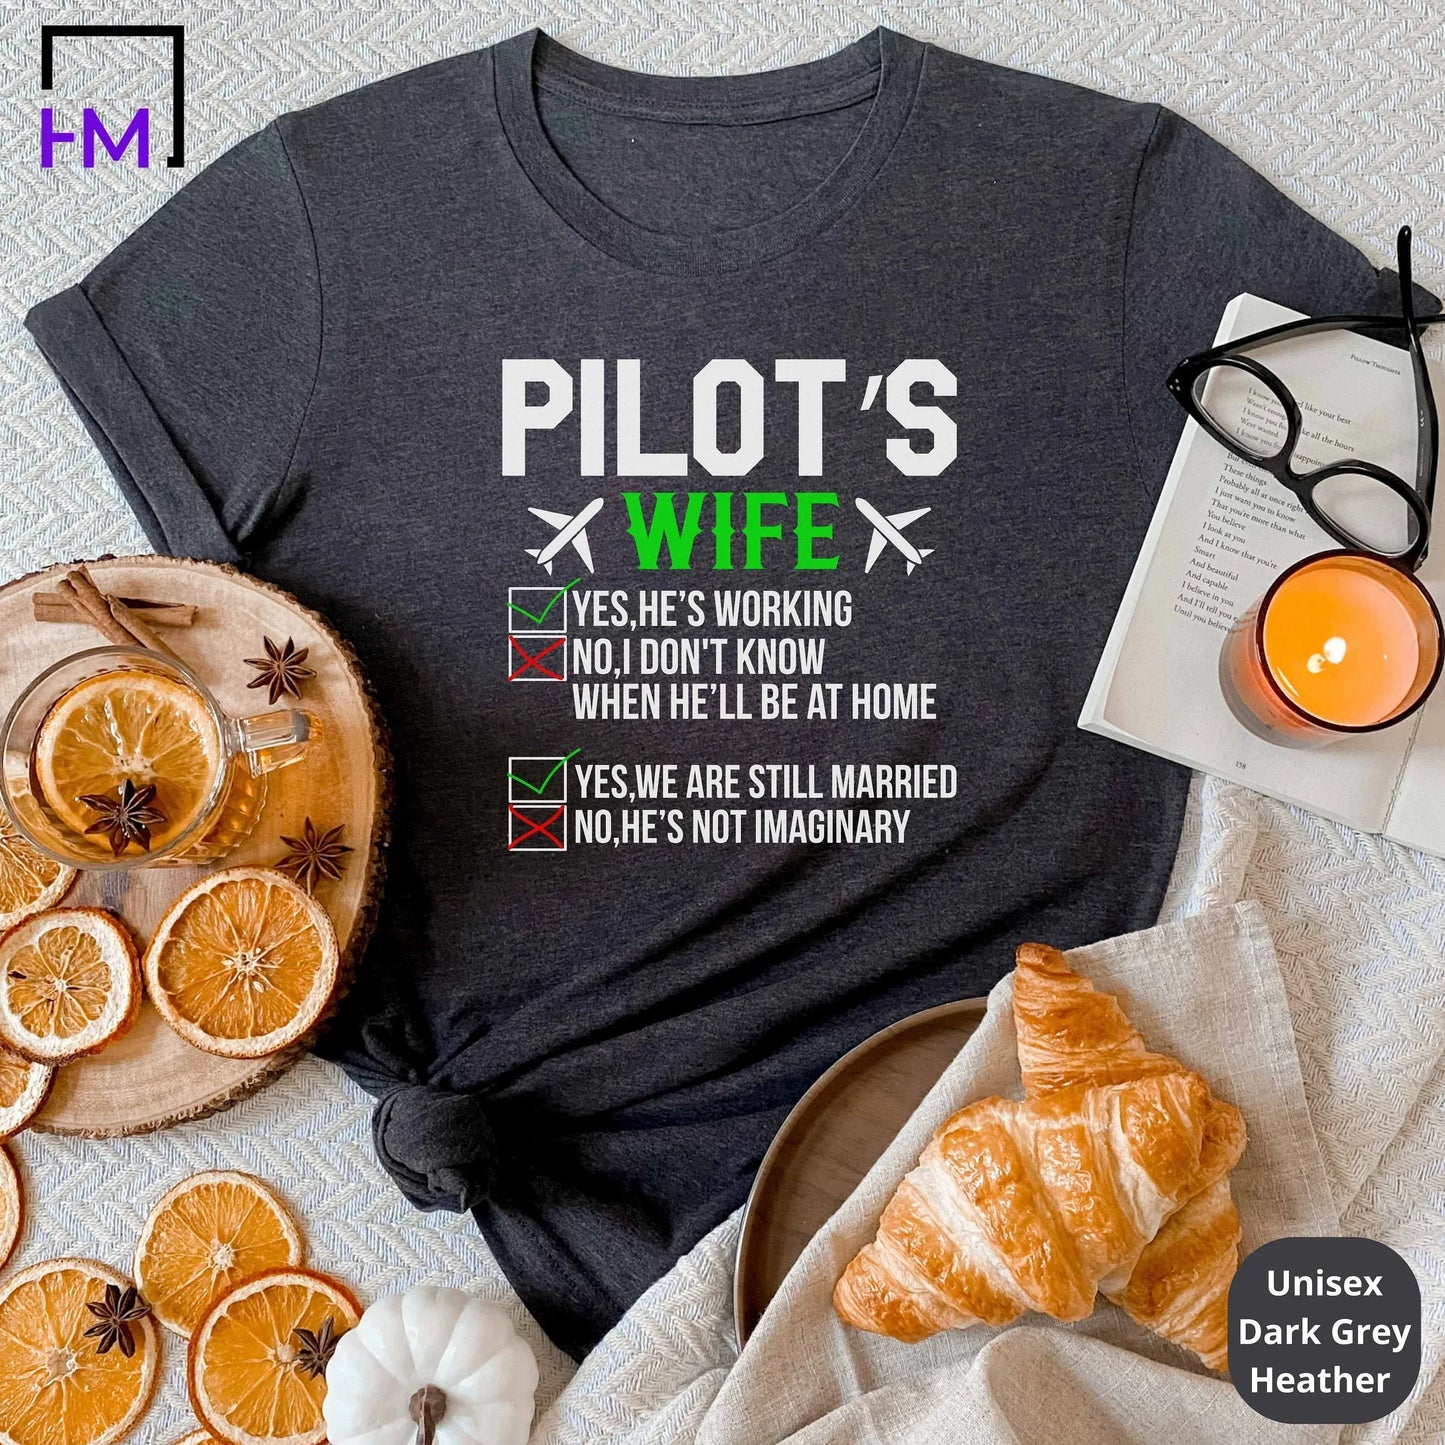 Funny Pilots Wife Shirt, Gift for Wife, Workaholic Gift for Pilot's Wife, Frequent Flyer, Traveler Adventurer Airplane Lover Shirt, Aviation HMDesignStudioUS